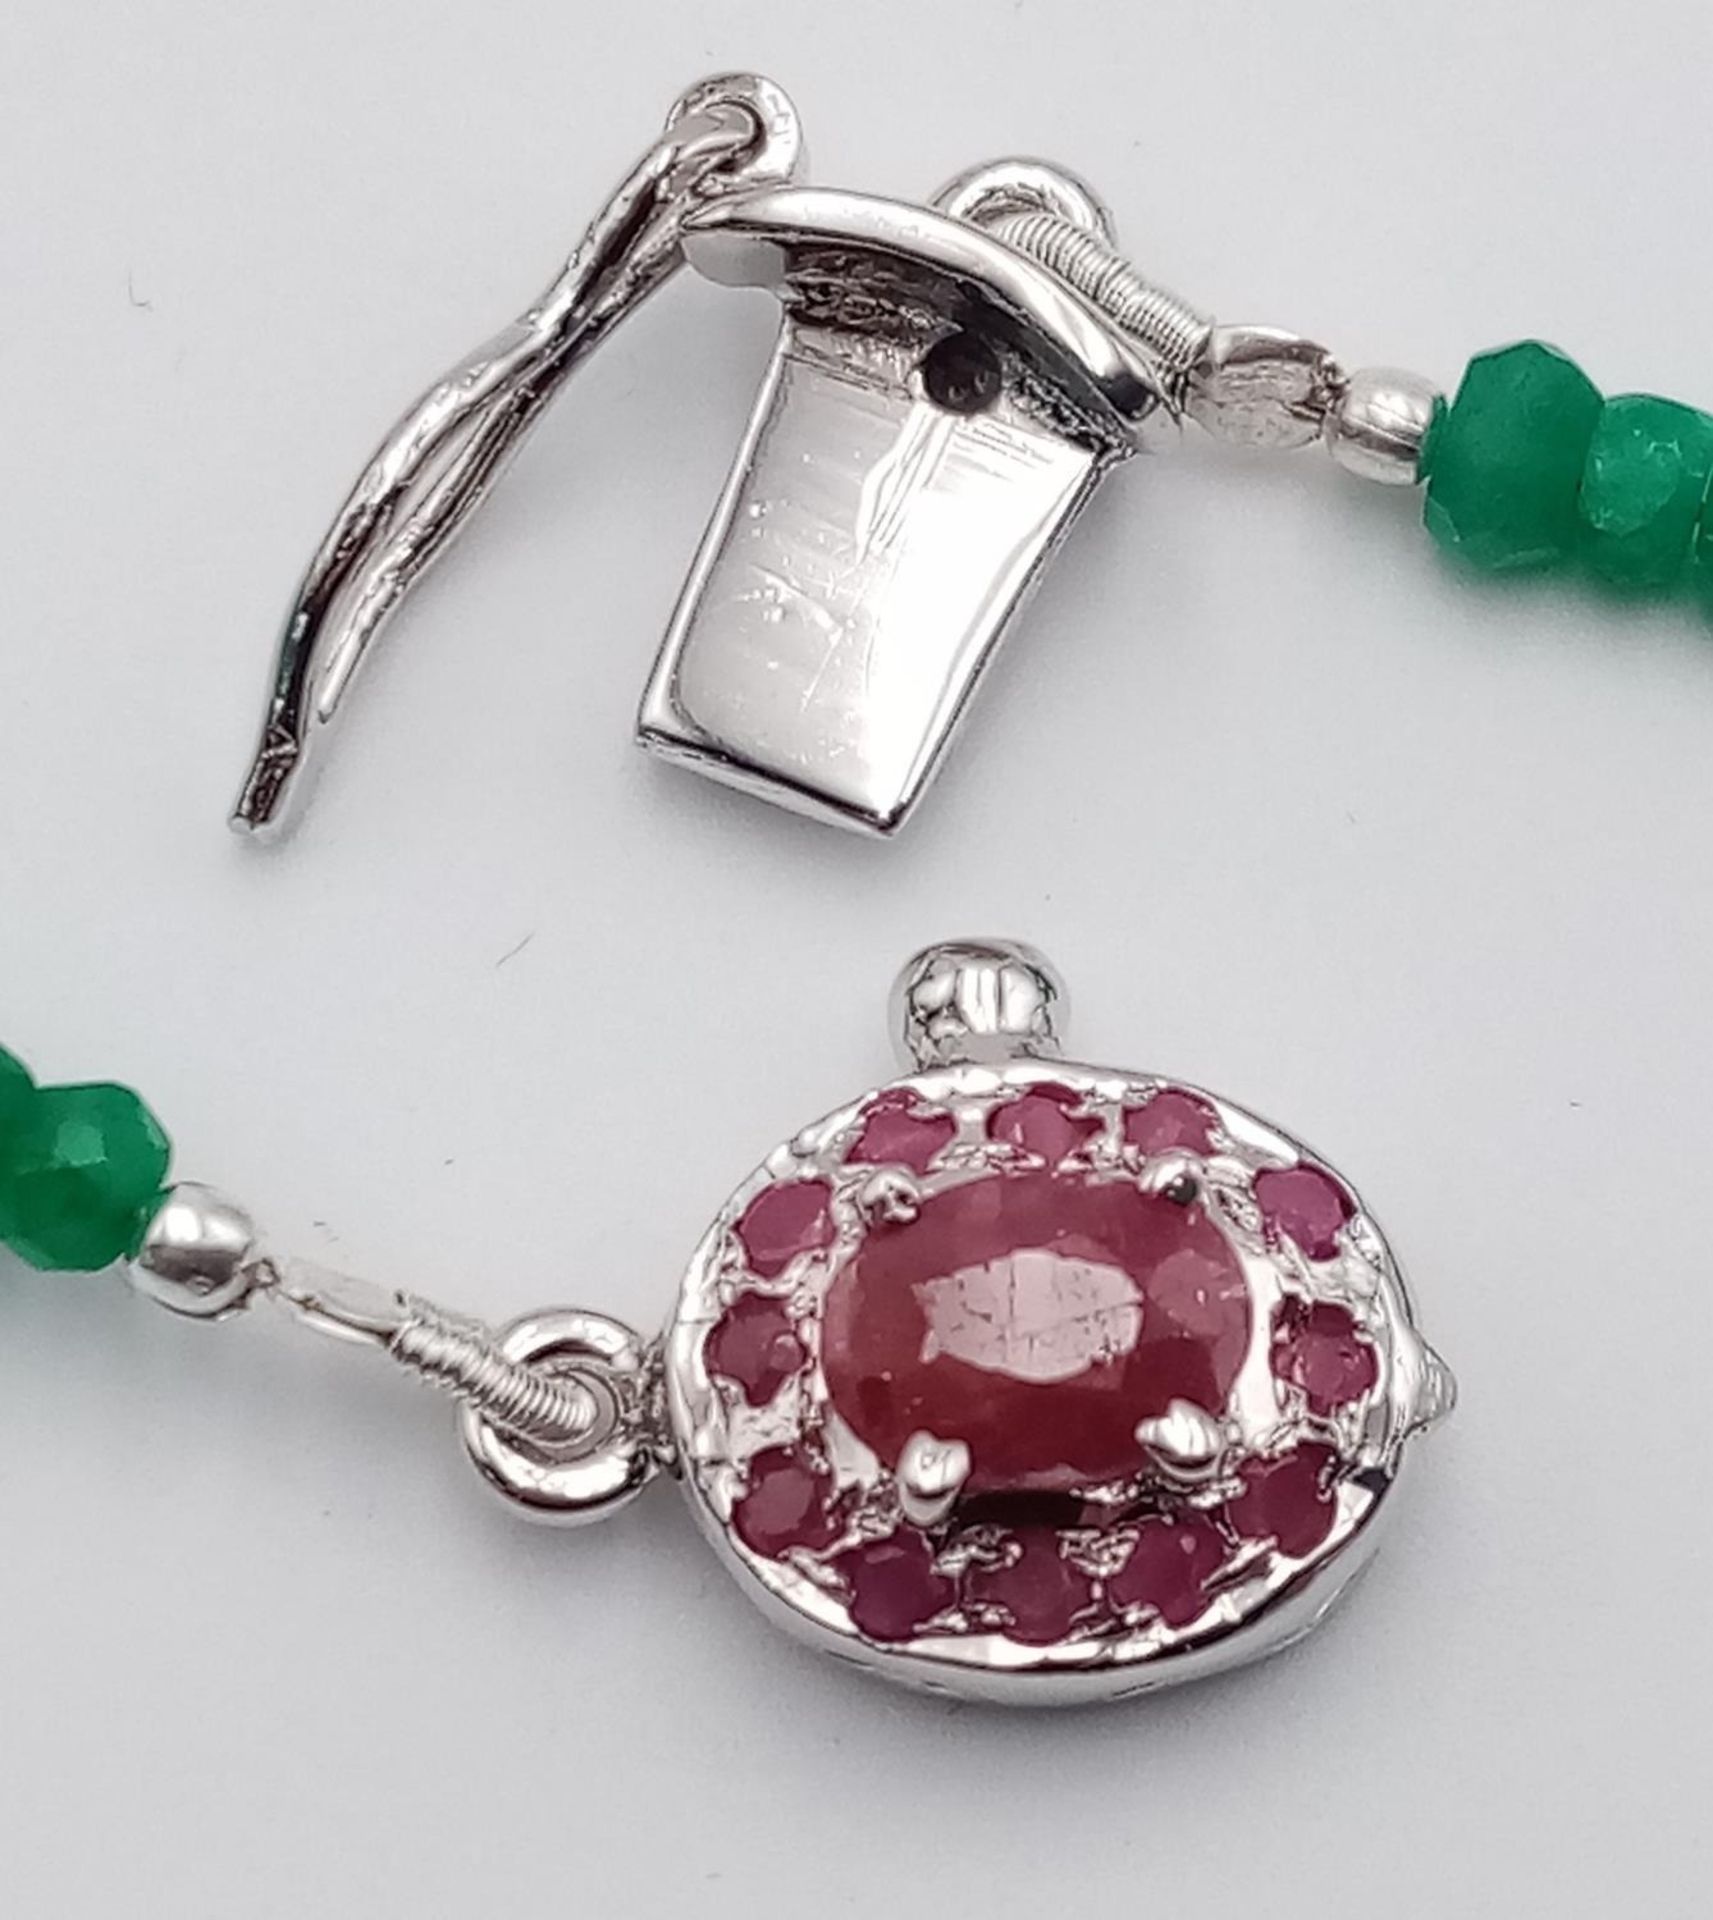 A 95ct Single Strand Emerald Rondelle Necklace with a Ruby and 925 Silver Clasp. 44cm. Ref: Cd-1285 - Image 4 of 5